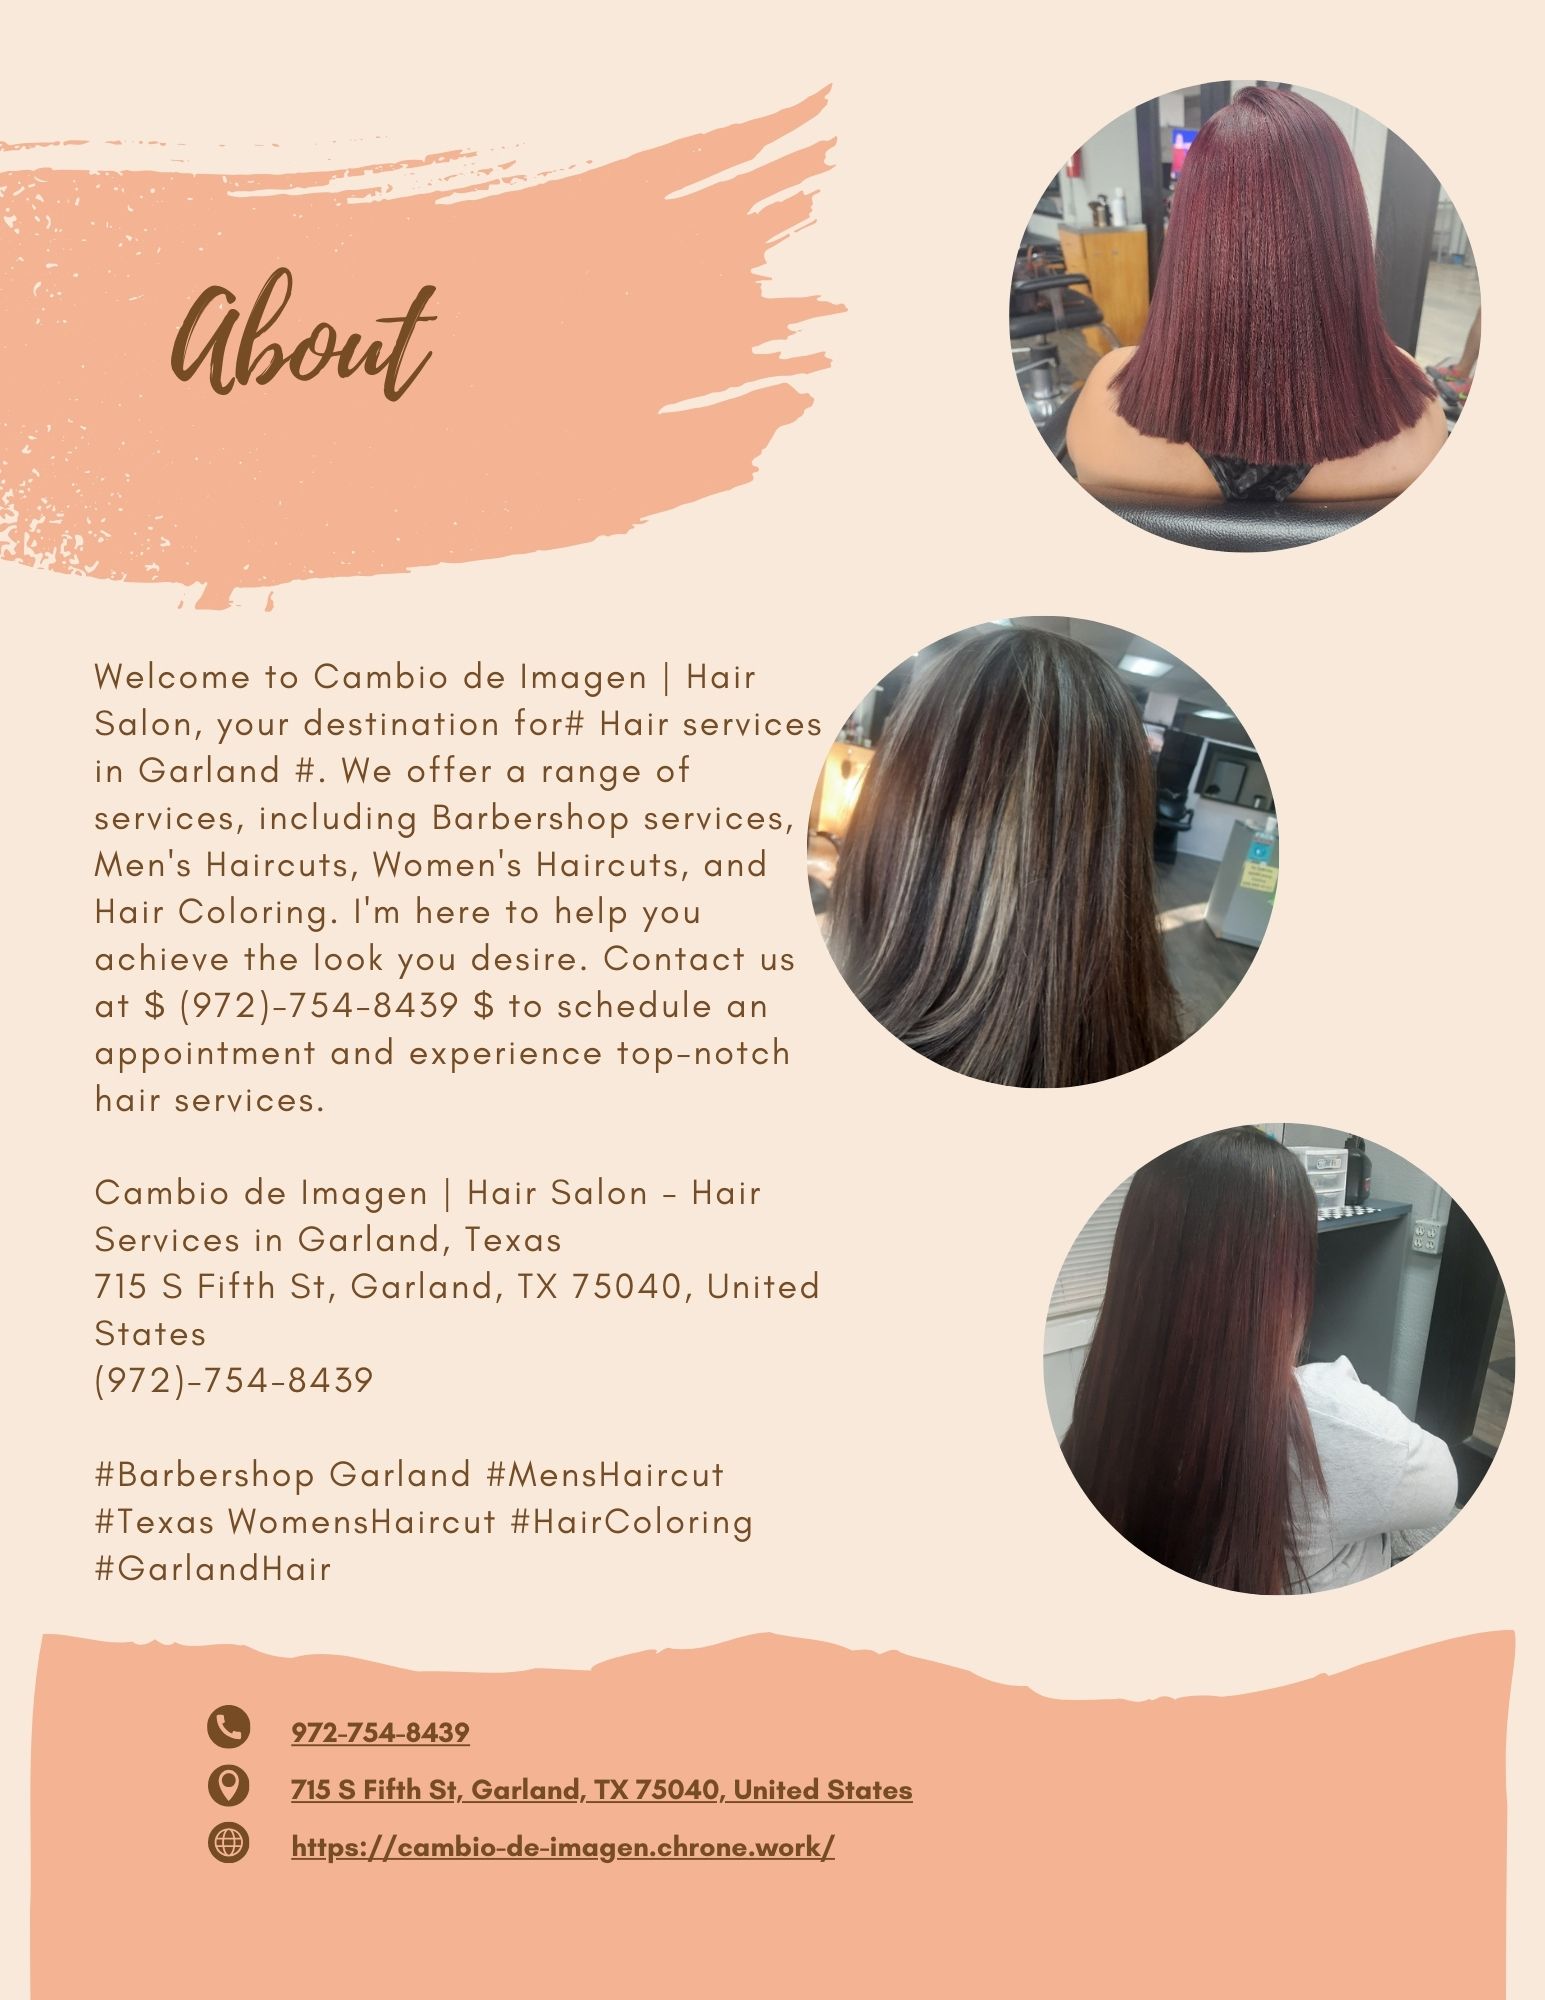 a

 

    
 

Welcome to Cambio de Imagen | Hair
Salon, your destination for# Hair services
in Garland #. We offer a range of
services, including Barbershop services, i
Men's Haircuts, Women's Haircuts, and
Hair Coloring. I'm here to help you
achieve the look you desire. Contact us
at $ (972)-754-8439 $ to schedule an
appointment and experience top-notch
hair services.

Cambio de Imagen | Hair Salon - Hair
Services in Garland, Texas

715 S Fifth St, Garland, TX 75040, United
States

(972)-754-8439

#Barbershop Garland #MensHaircut
#Texas WomensHaircut #HairColoring
#GarlandHair

 

QO 9727548439
© 75 5Fifth St, Garland, TX 75040, United States
® https://cambio-de-imagen.chrone.work/